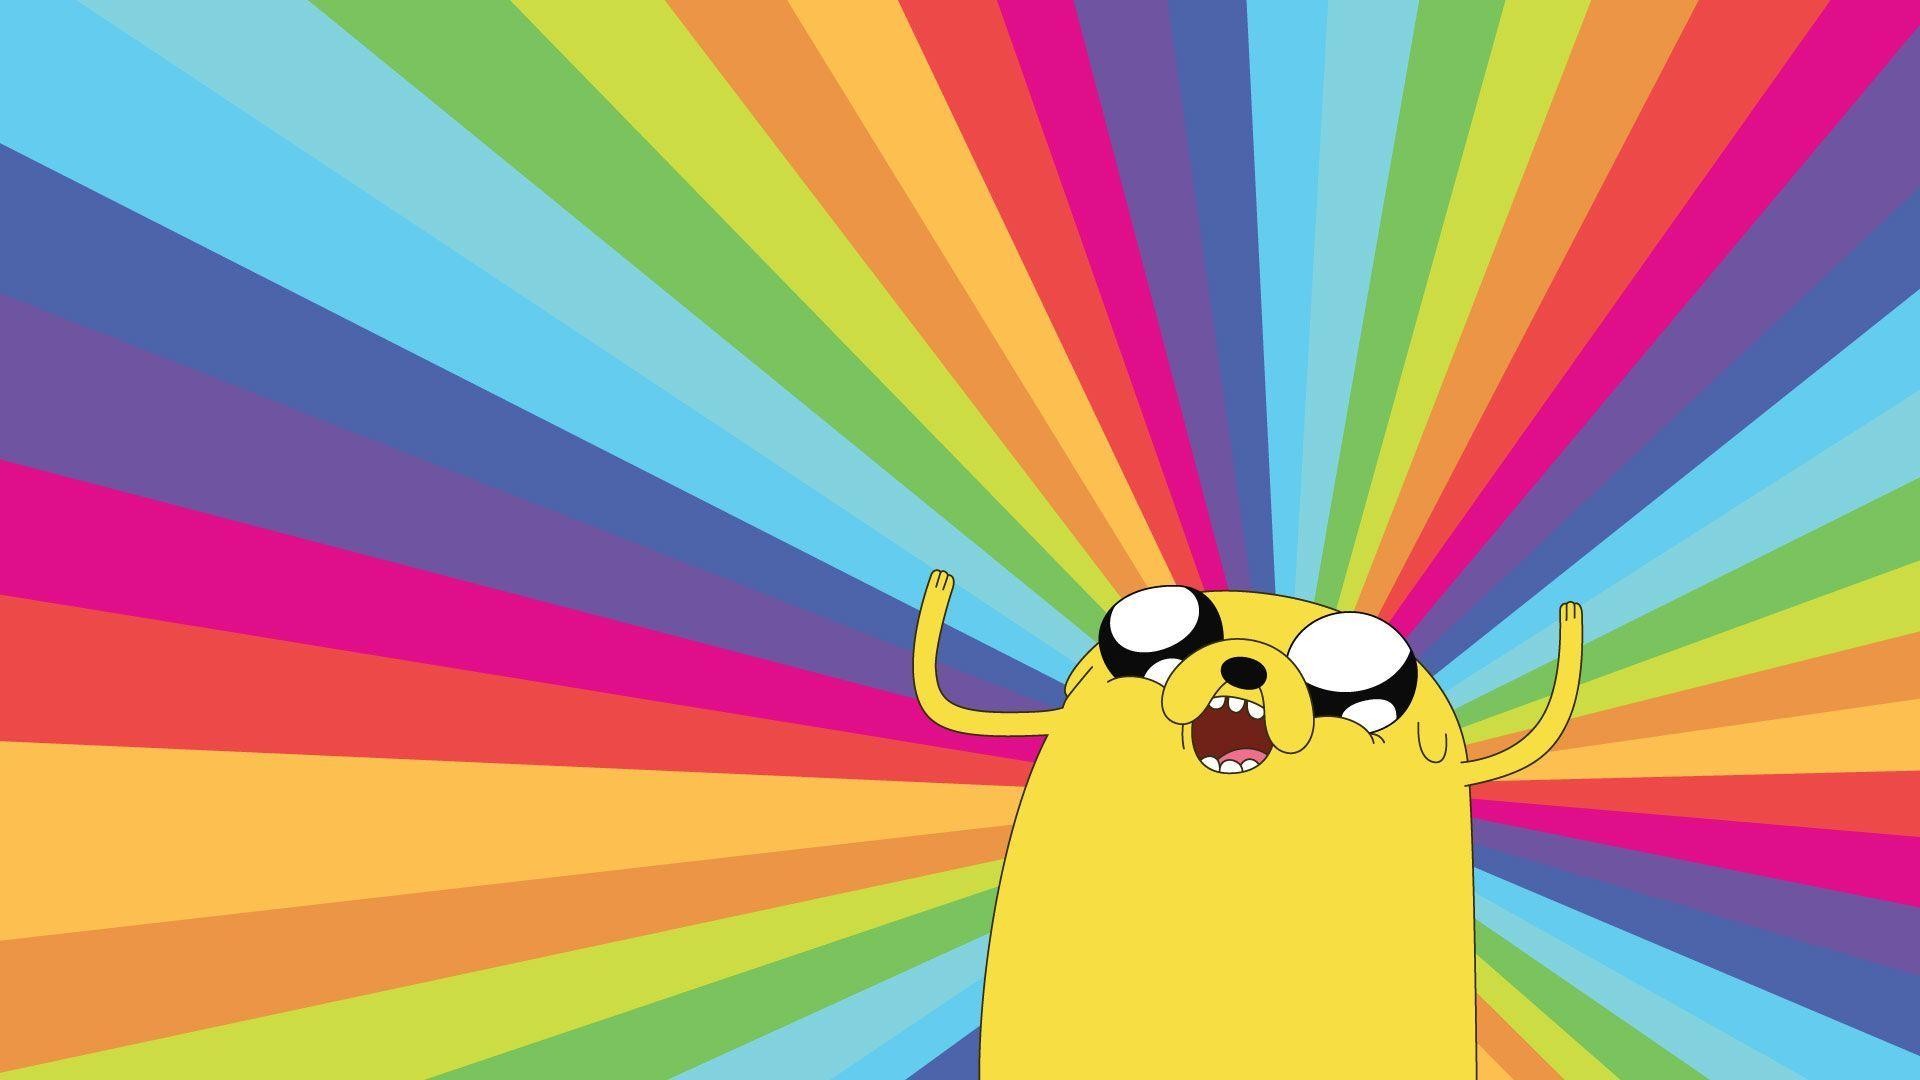 1920x1080 Adventure Time Christmas Iphone Wallpaper : Adventure time iphone  backgrounds wallpaper cave